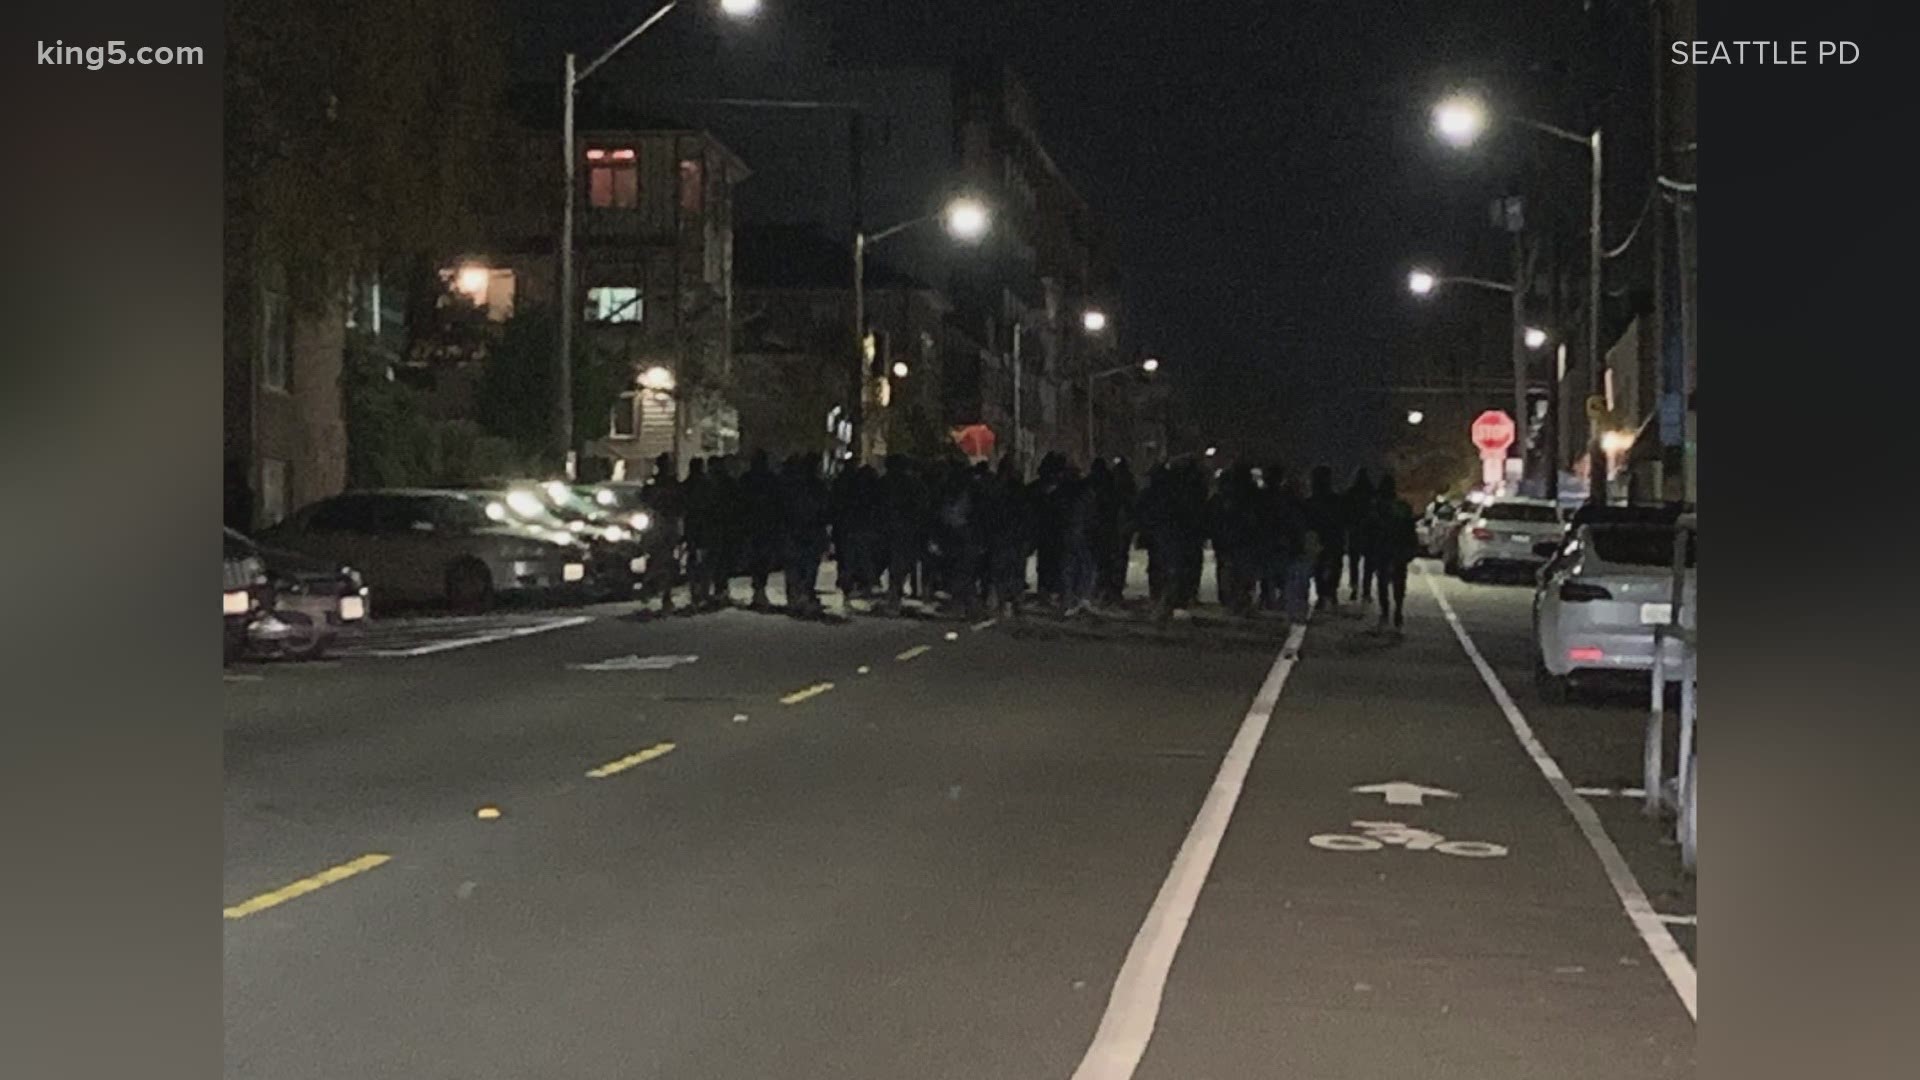 Dozens of people marched through the streets of Seattle's University District on Friday night breaking windows and graffitiing property, according to Seattle police.